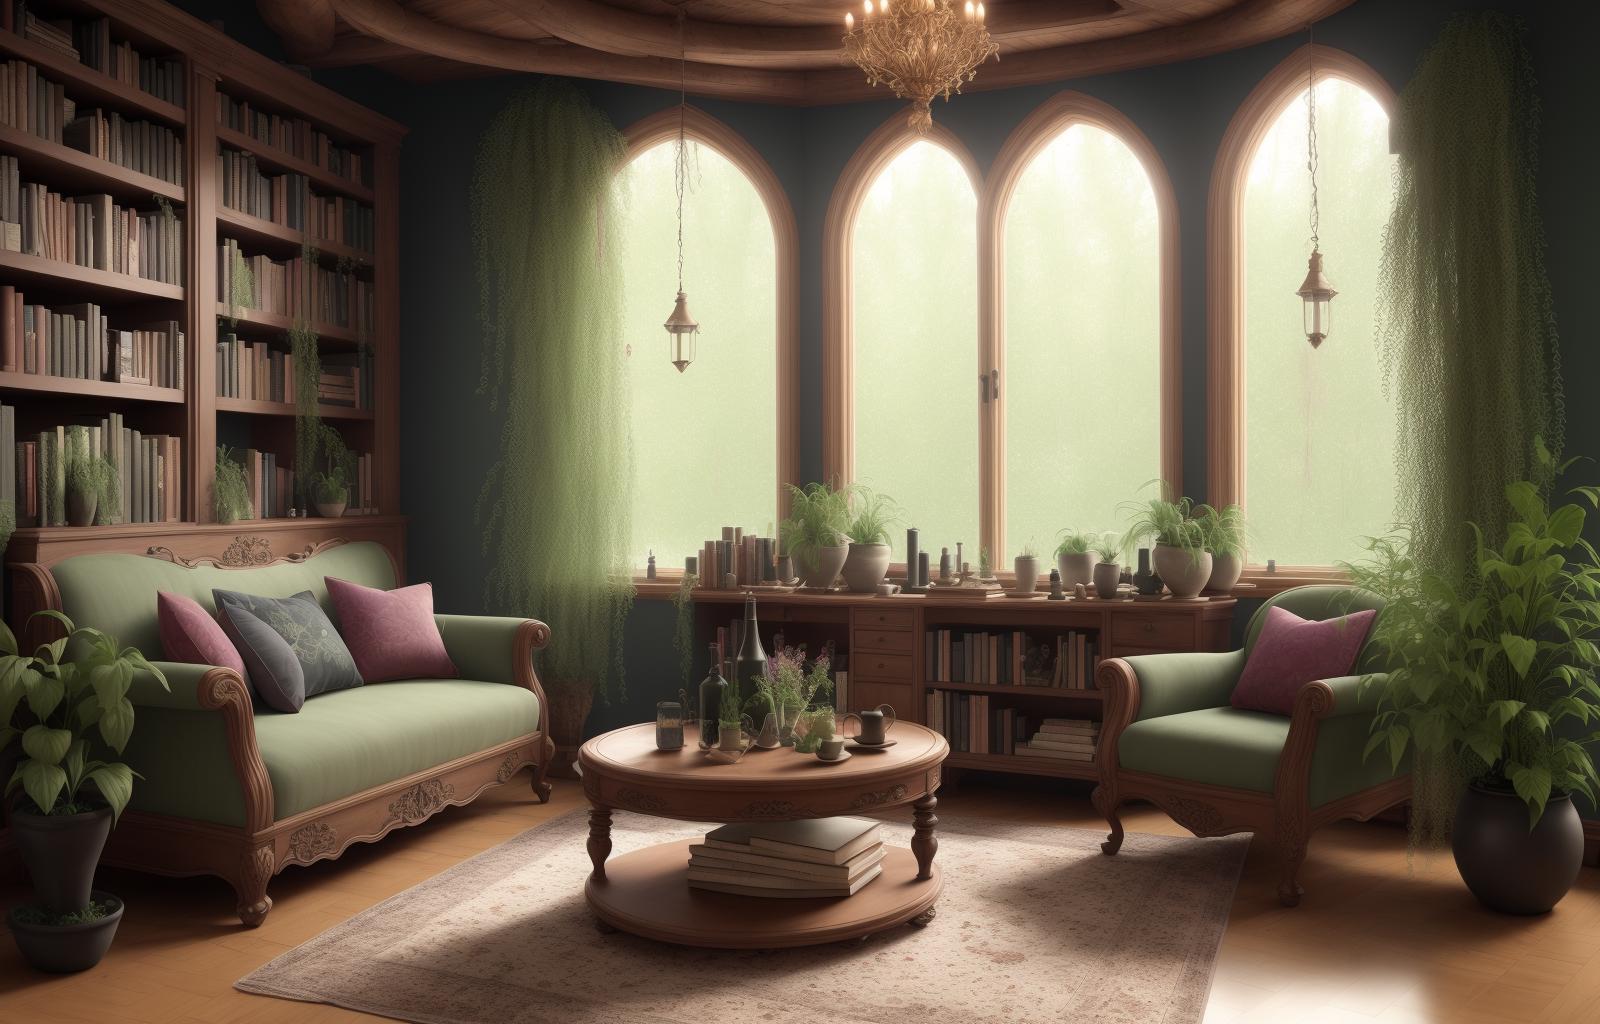 Magical Interior Style: Hobbit inspired living rooms, kitchens, bathrooms and more image by marshall424